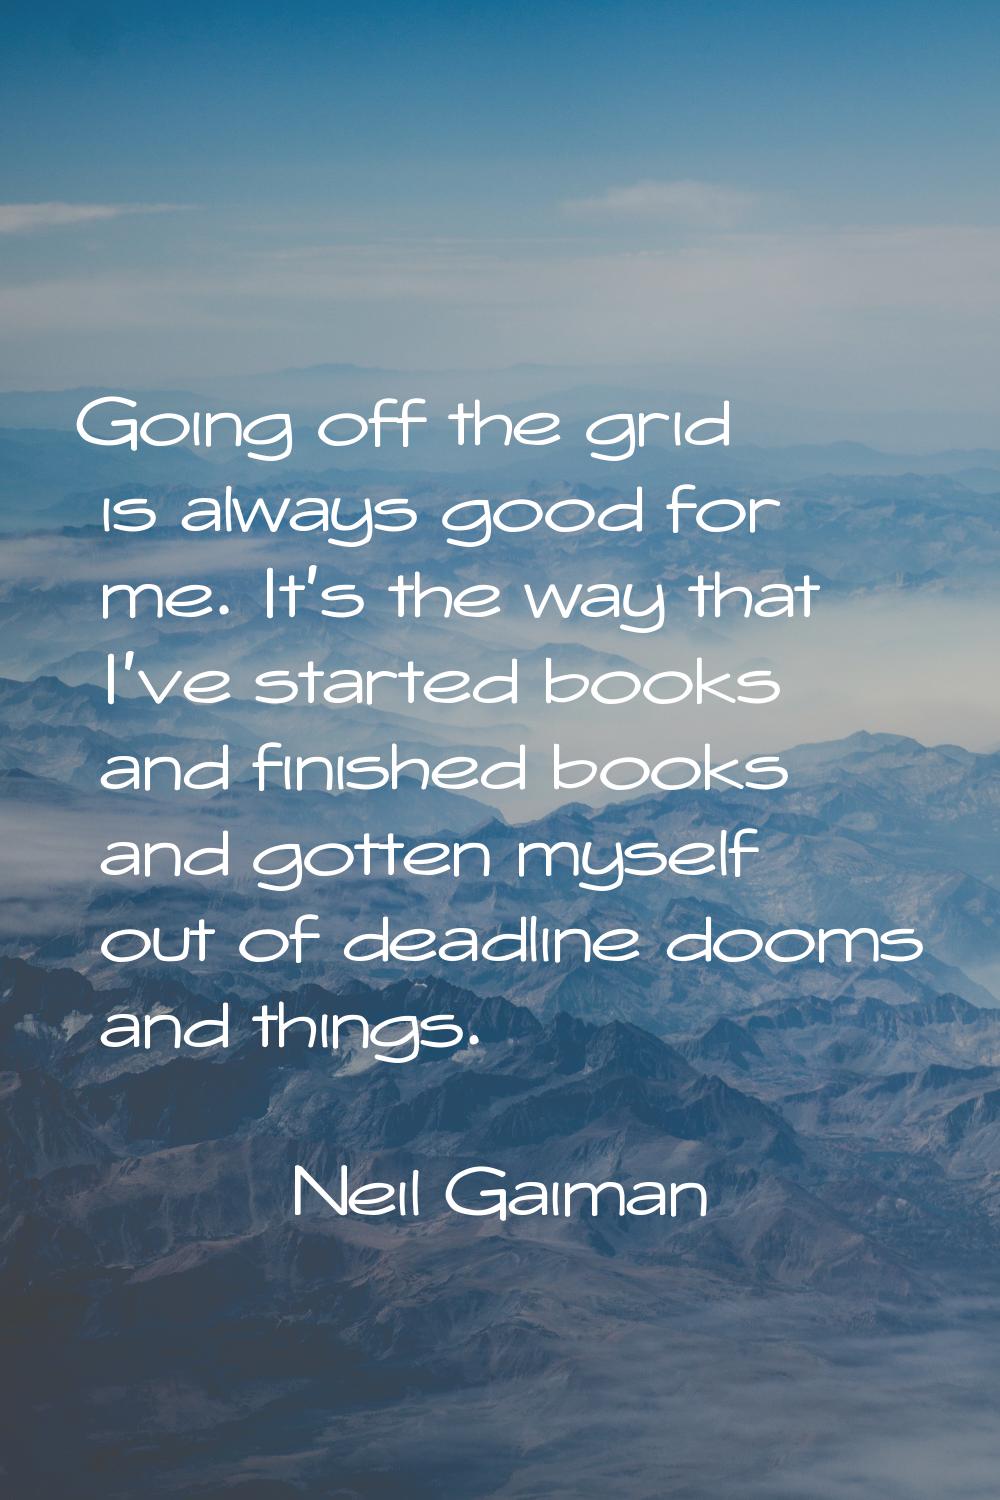 Going off the grid is always good for me. It's the way that I've started books and finished books a